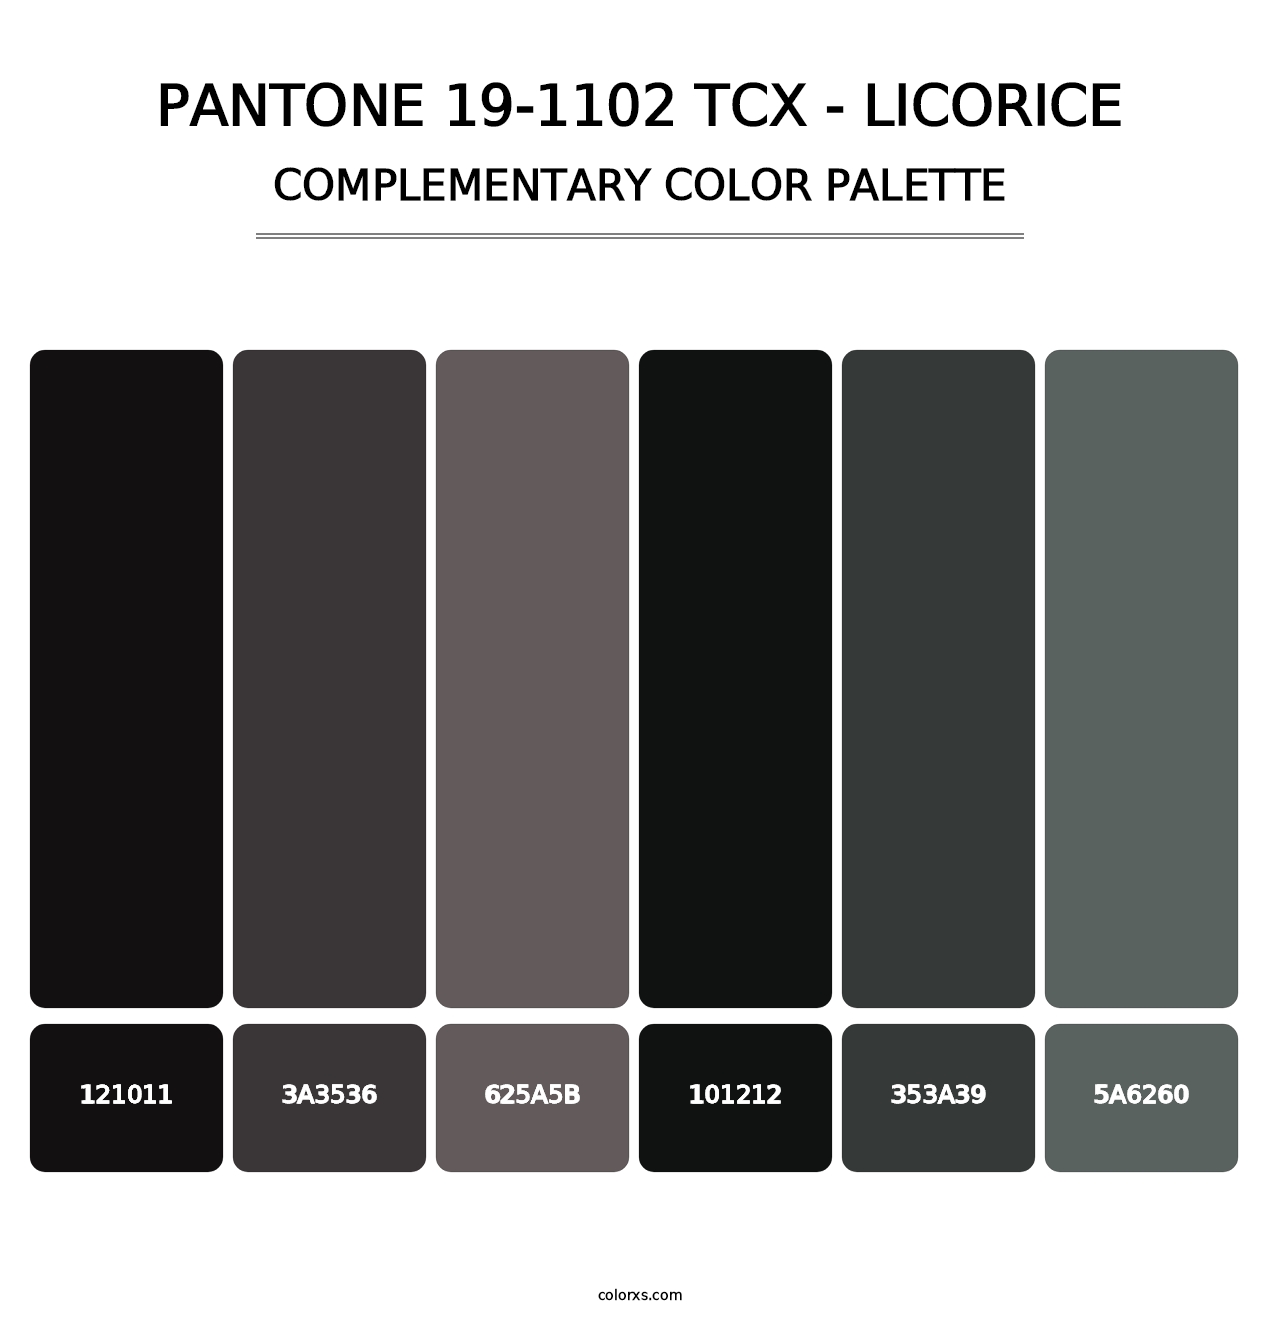 PANTONE 19-1102 TCX - Licorice - Complementary Color Palette